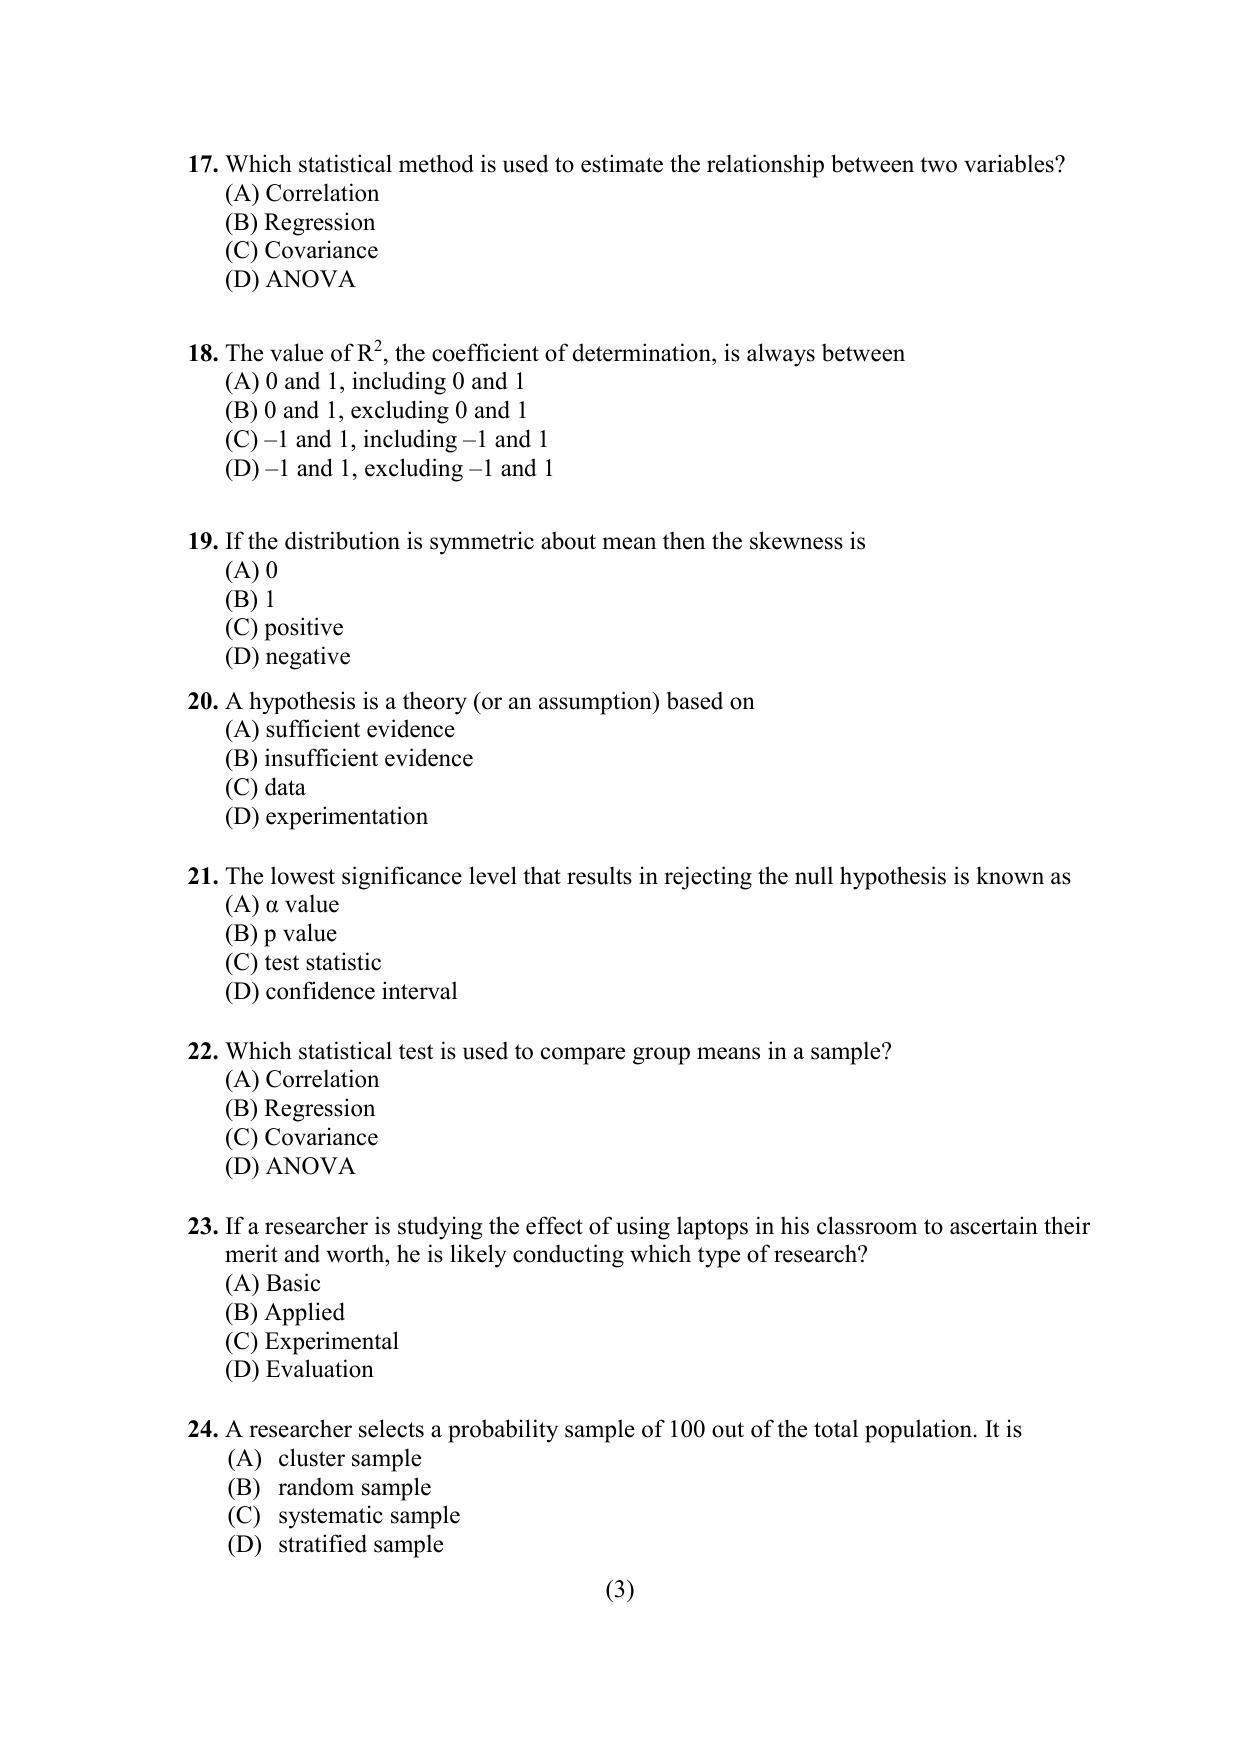 PU MPET Anthropology 2022 Question Papers - Page 44